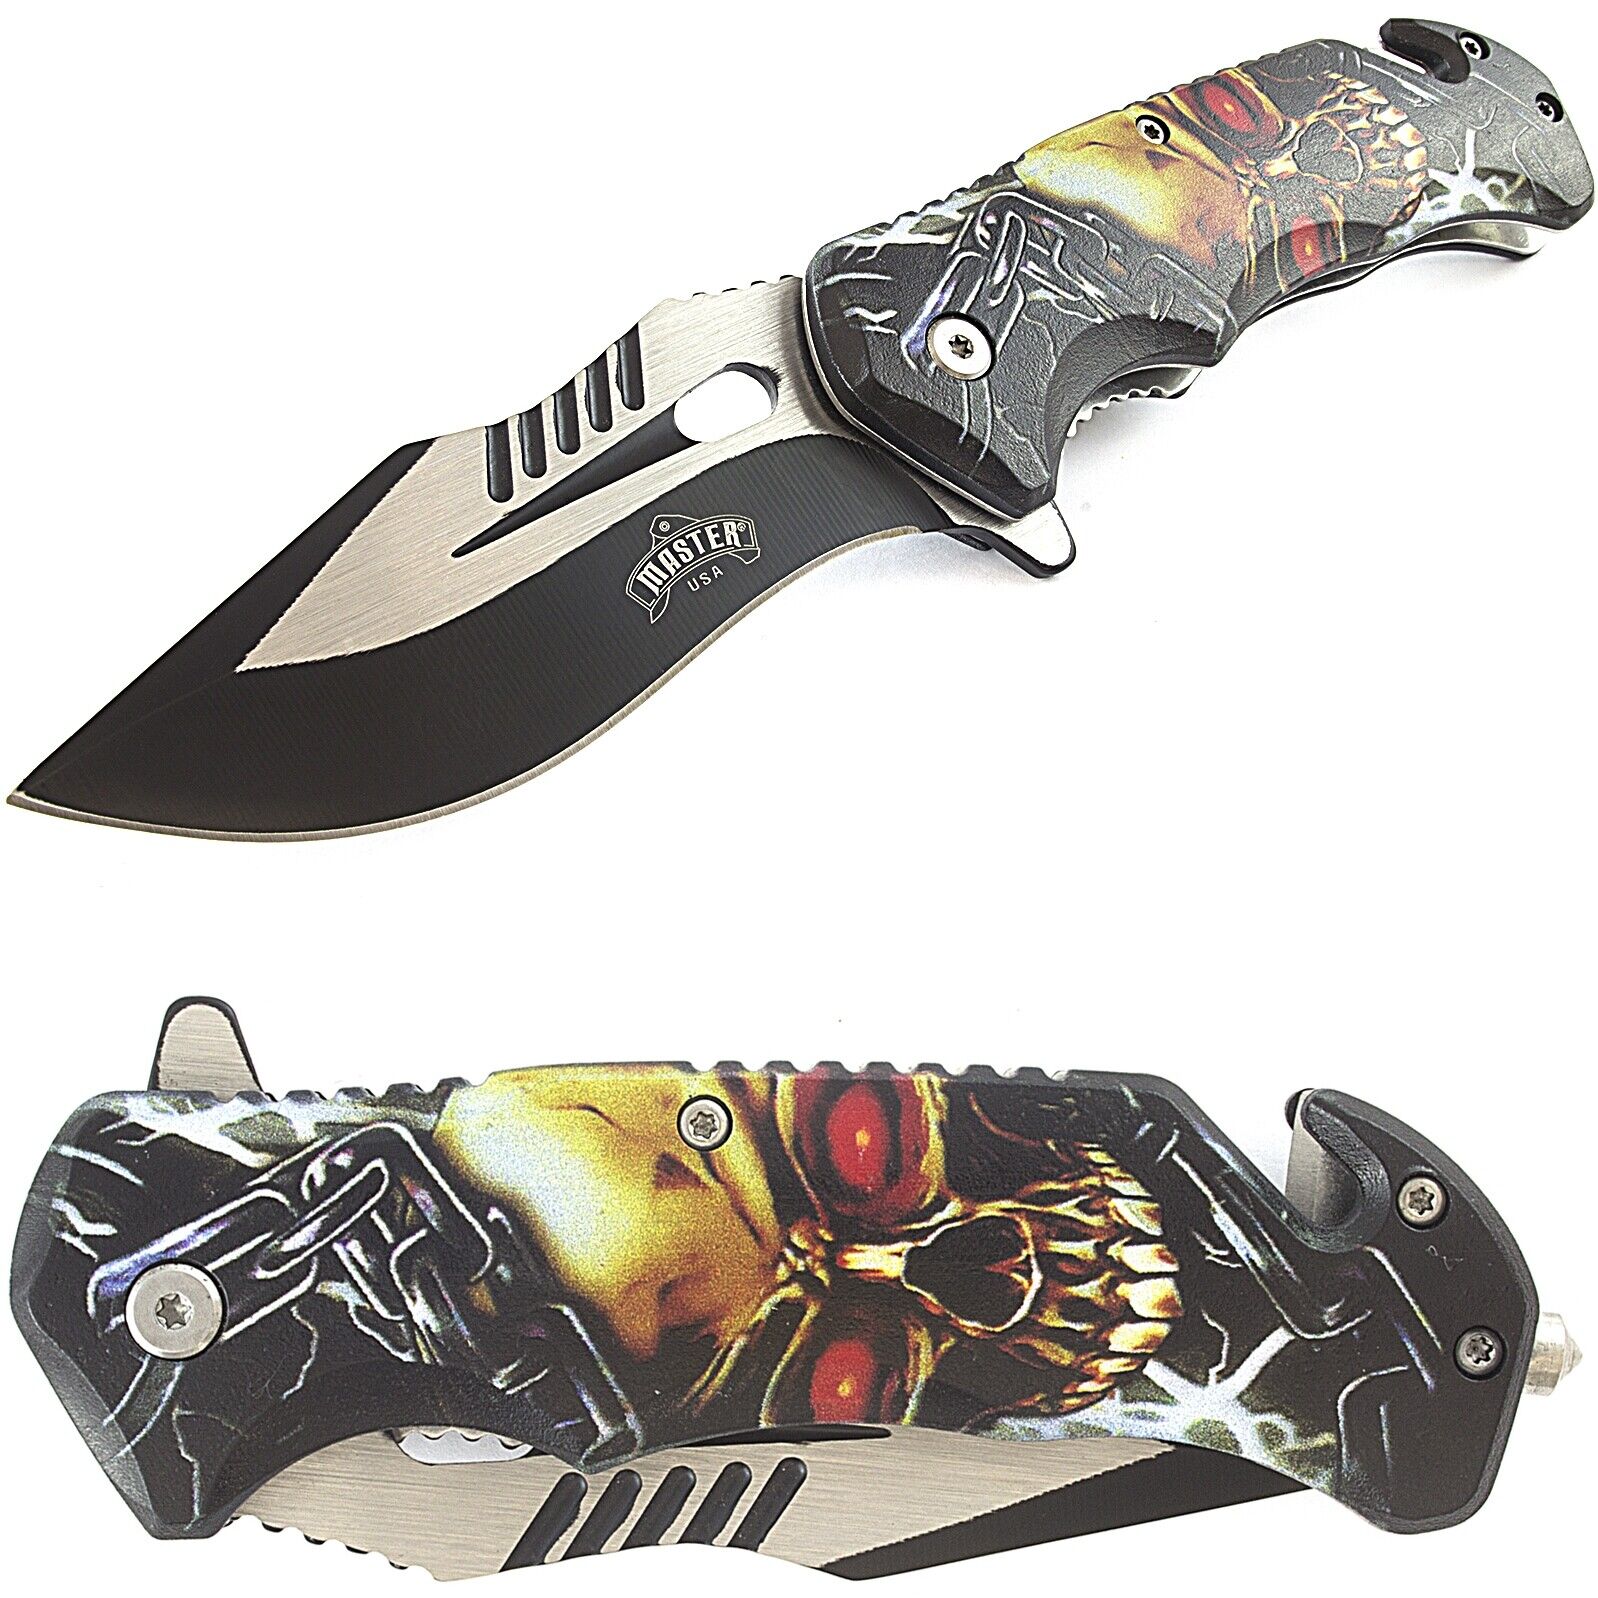 10 PACK WICKED SKULL & CHAINS SPRING ASSISTED FANTASY FOLDING POCKET KNIFE EDC